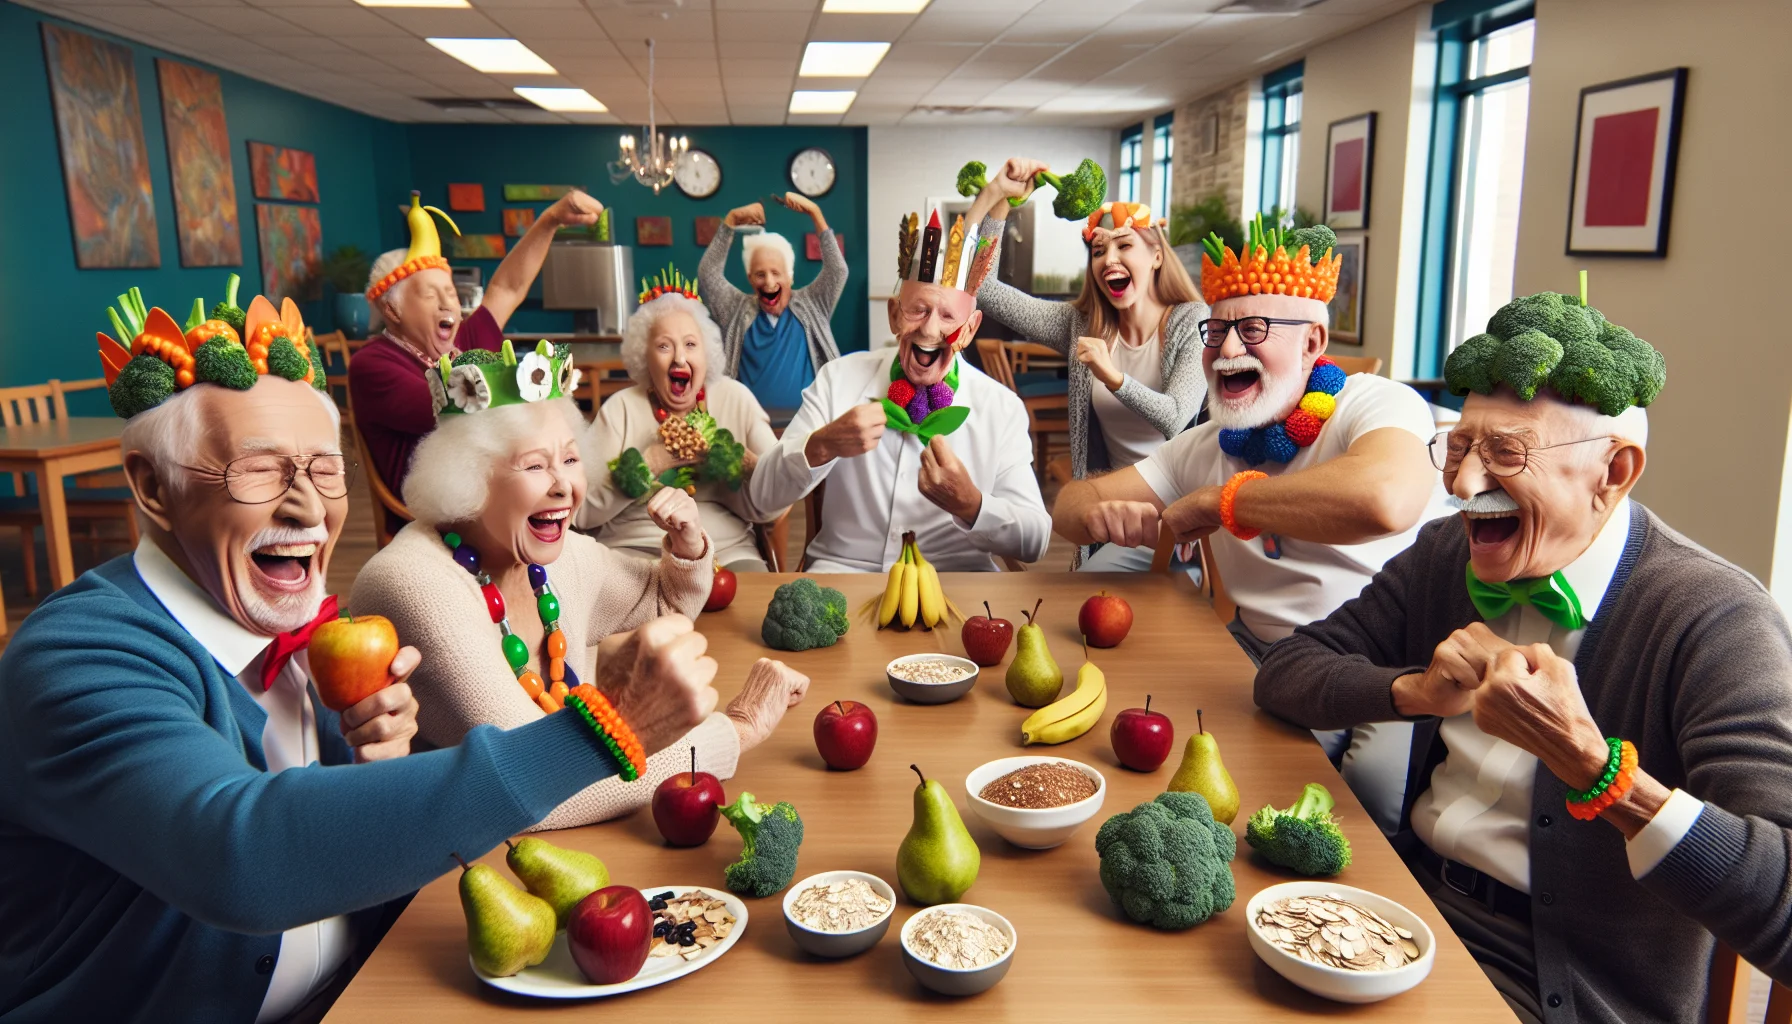 Imagine a humorous scene unfolding in a brightly lit retirement home cafeteria. Picture a group of elderly individuals with mix of descent such as Caucasian, Hispanic and Middle-Eastern joyously engaged in a two-fold challenge. First, they're enjoying a playful food fight with colorful, rich in fiber foods like broccoli, oatmeal, and pears. Second, they're competing in a hilarious skit mimicking a fashion show, with eccentric accessories made from these healthy foods - broccoli crowns, pear necklaces, and oatmeal bracelets. Integrated humorous elements such as comical expressions and playful banter, with the backdrop underscoring the importance of high-fiber diet for health.